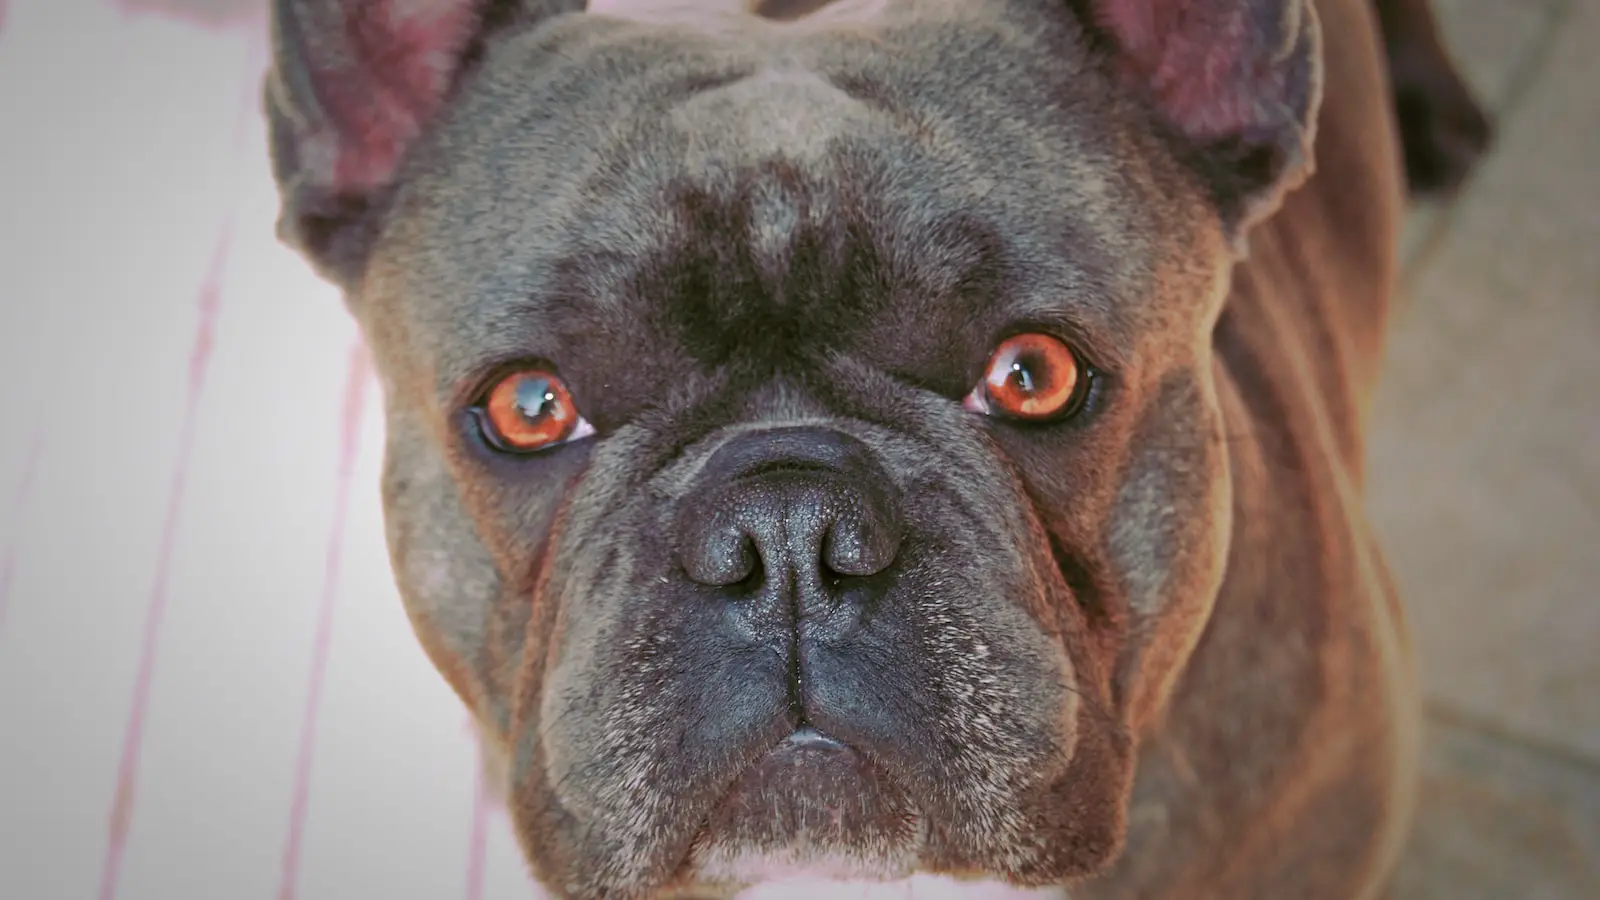 2. Aesthetics and Sartorial​ Elegance: French Bulldogs' Distinctive Physical Features